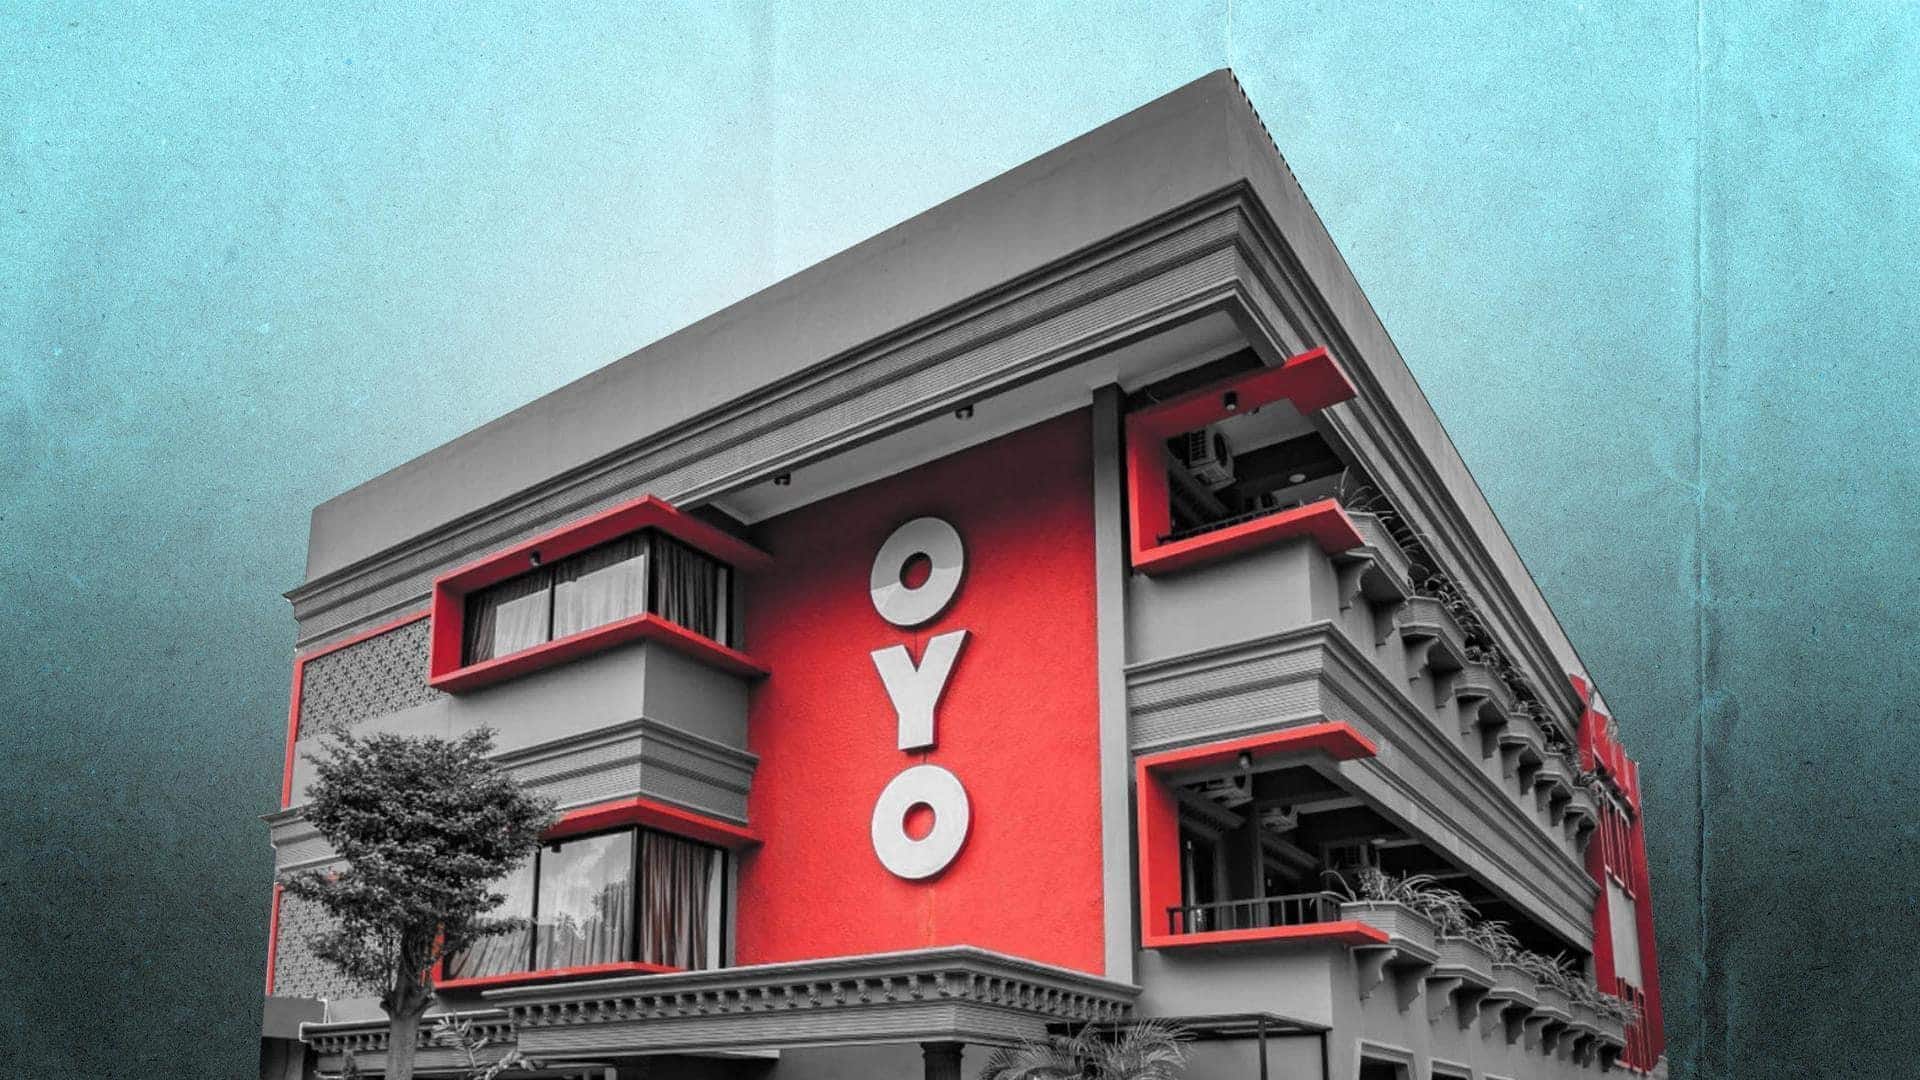 OYO reportedly negotiating new funding round at $3 billion valuation